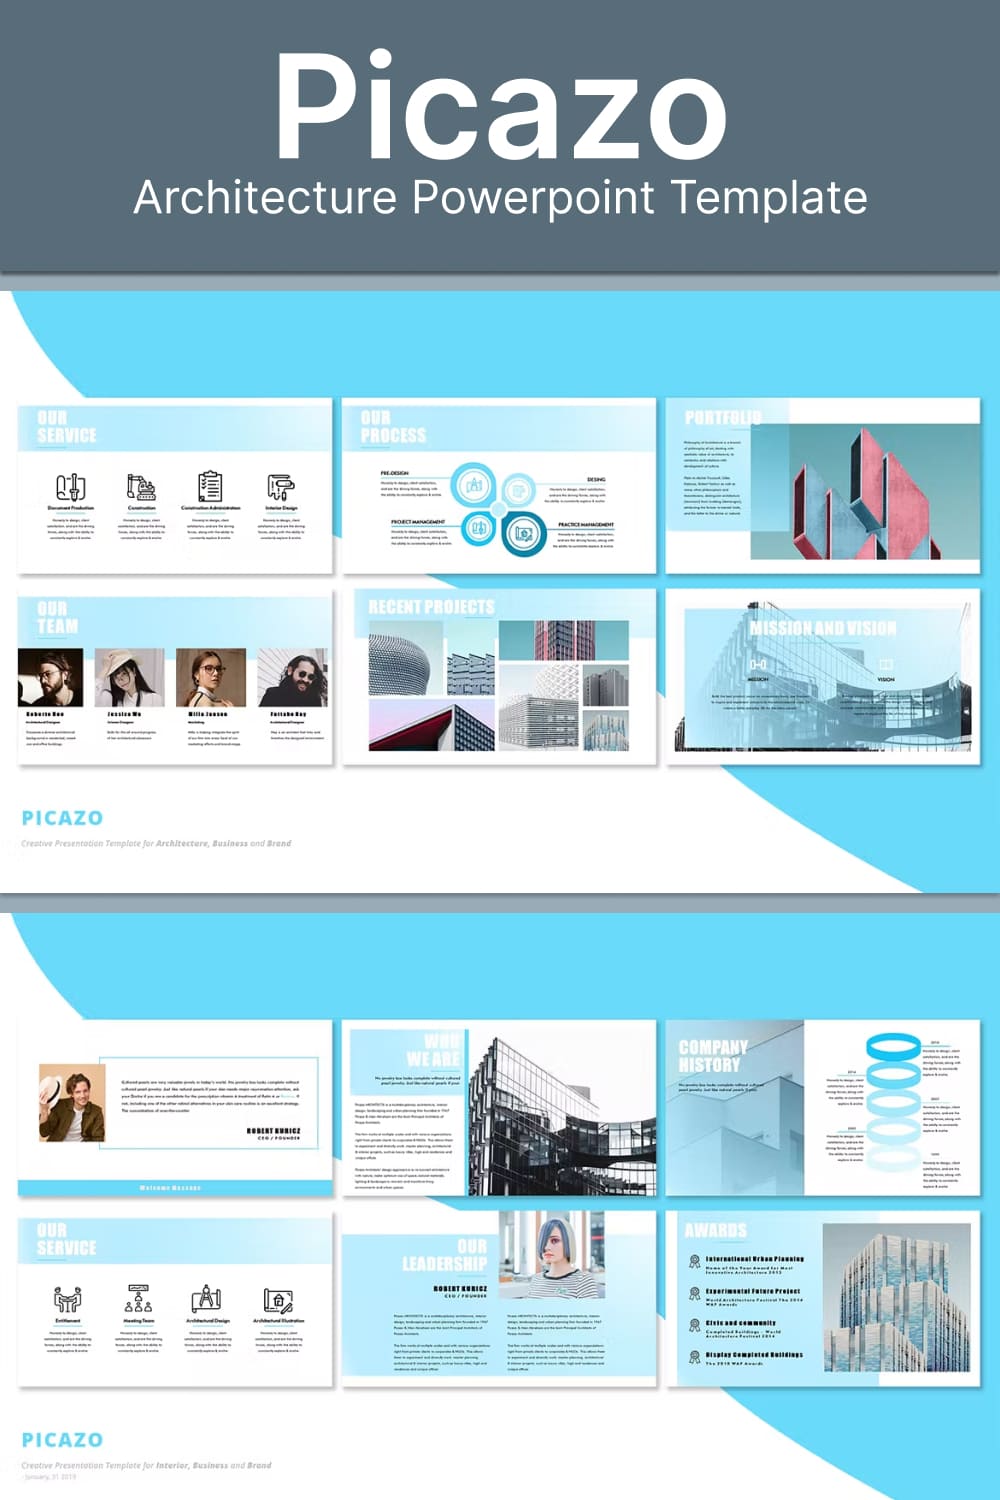 Picazo architecture powerpoint template - pinterest image preview.